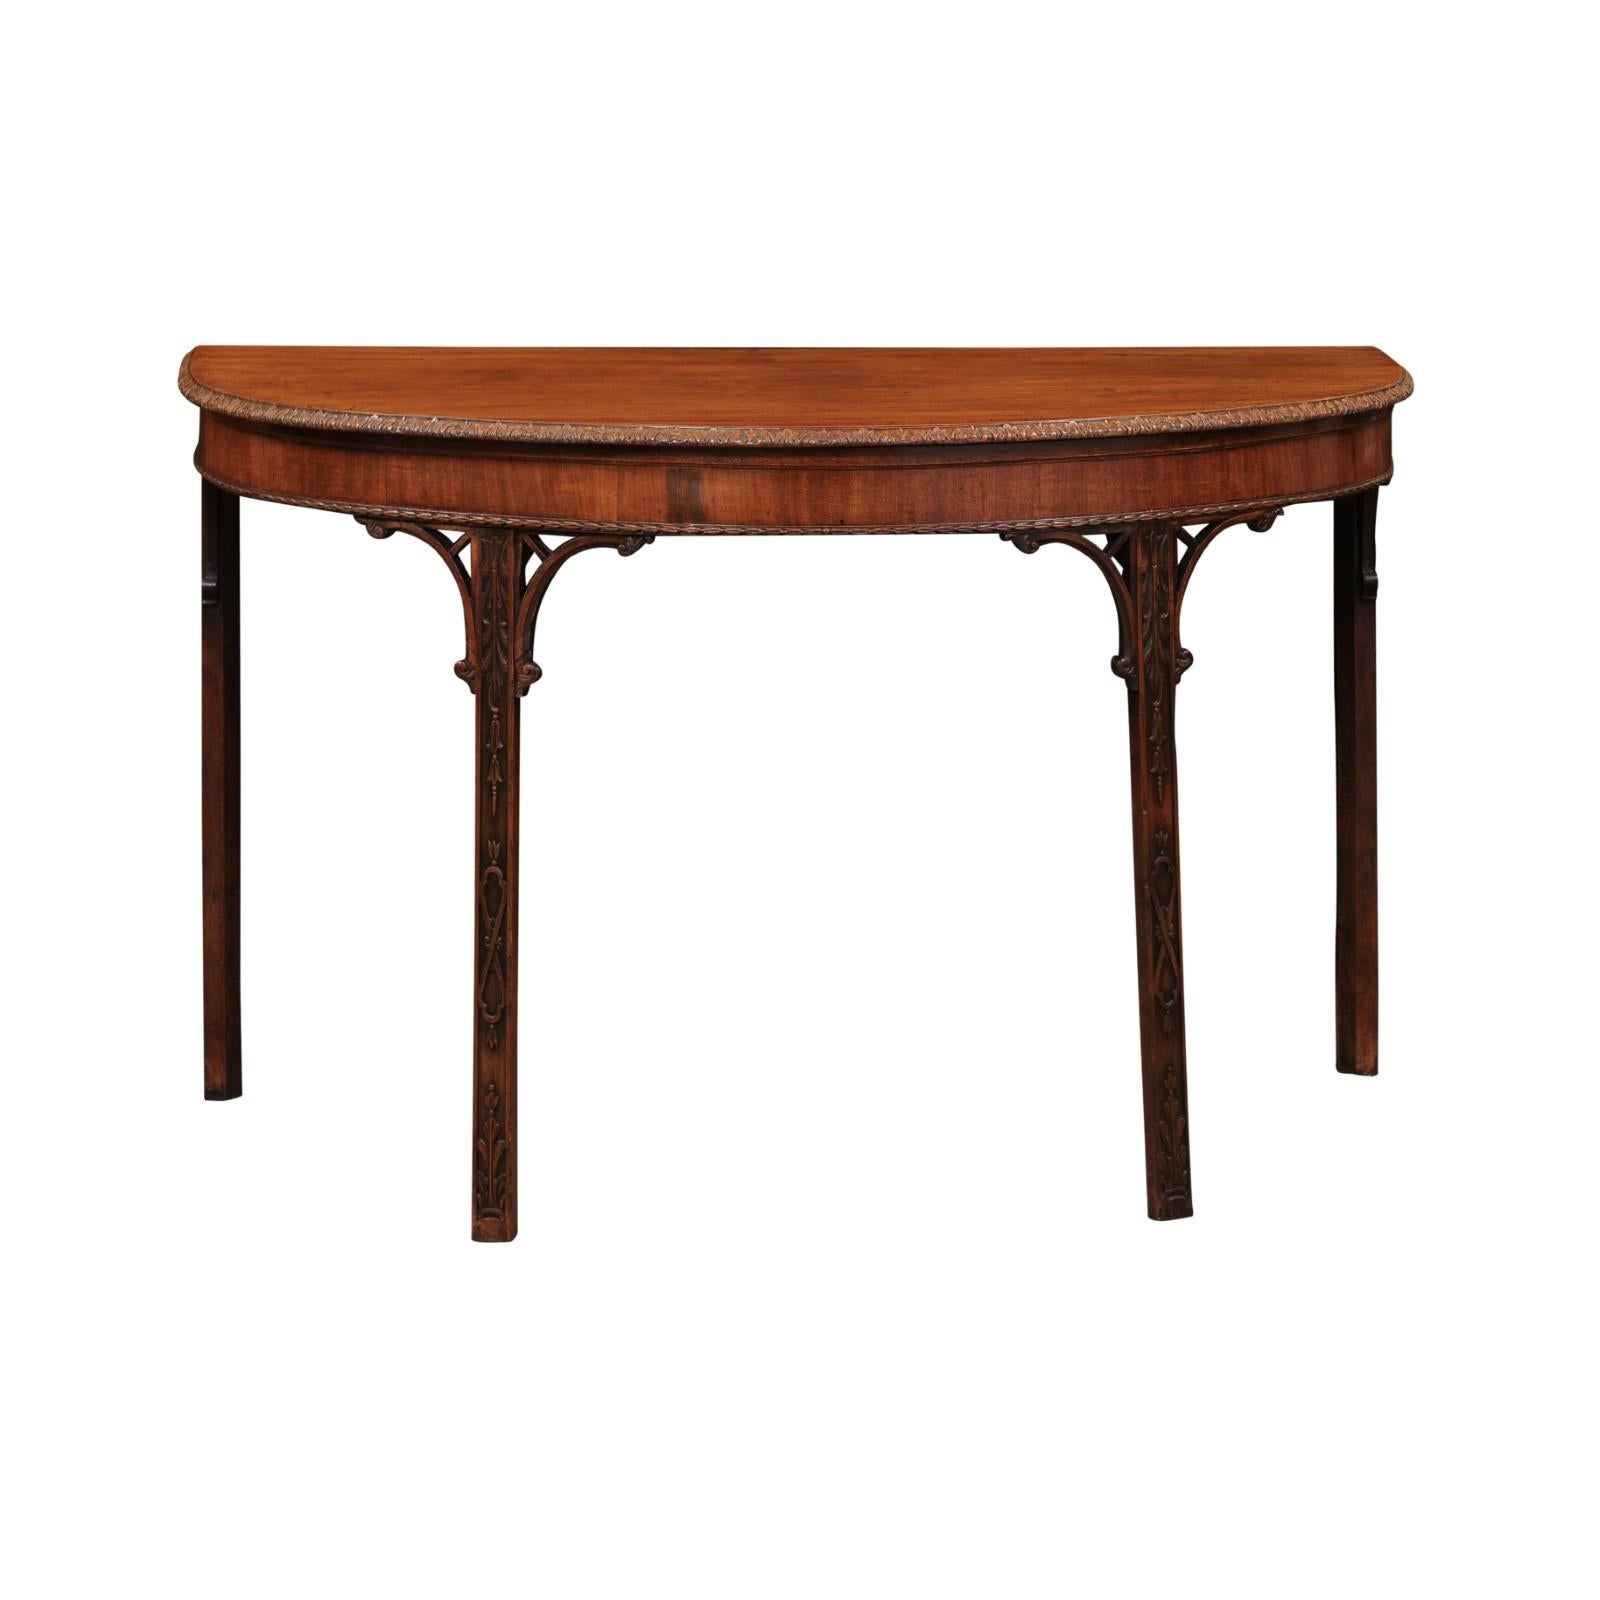 English Mahogany Chippendale Demilune Console Table with Carved Foliage Detail, 18th Century